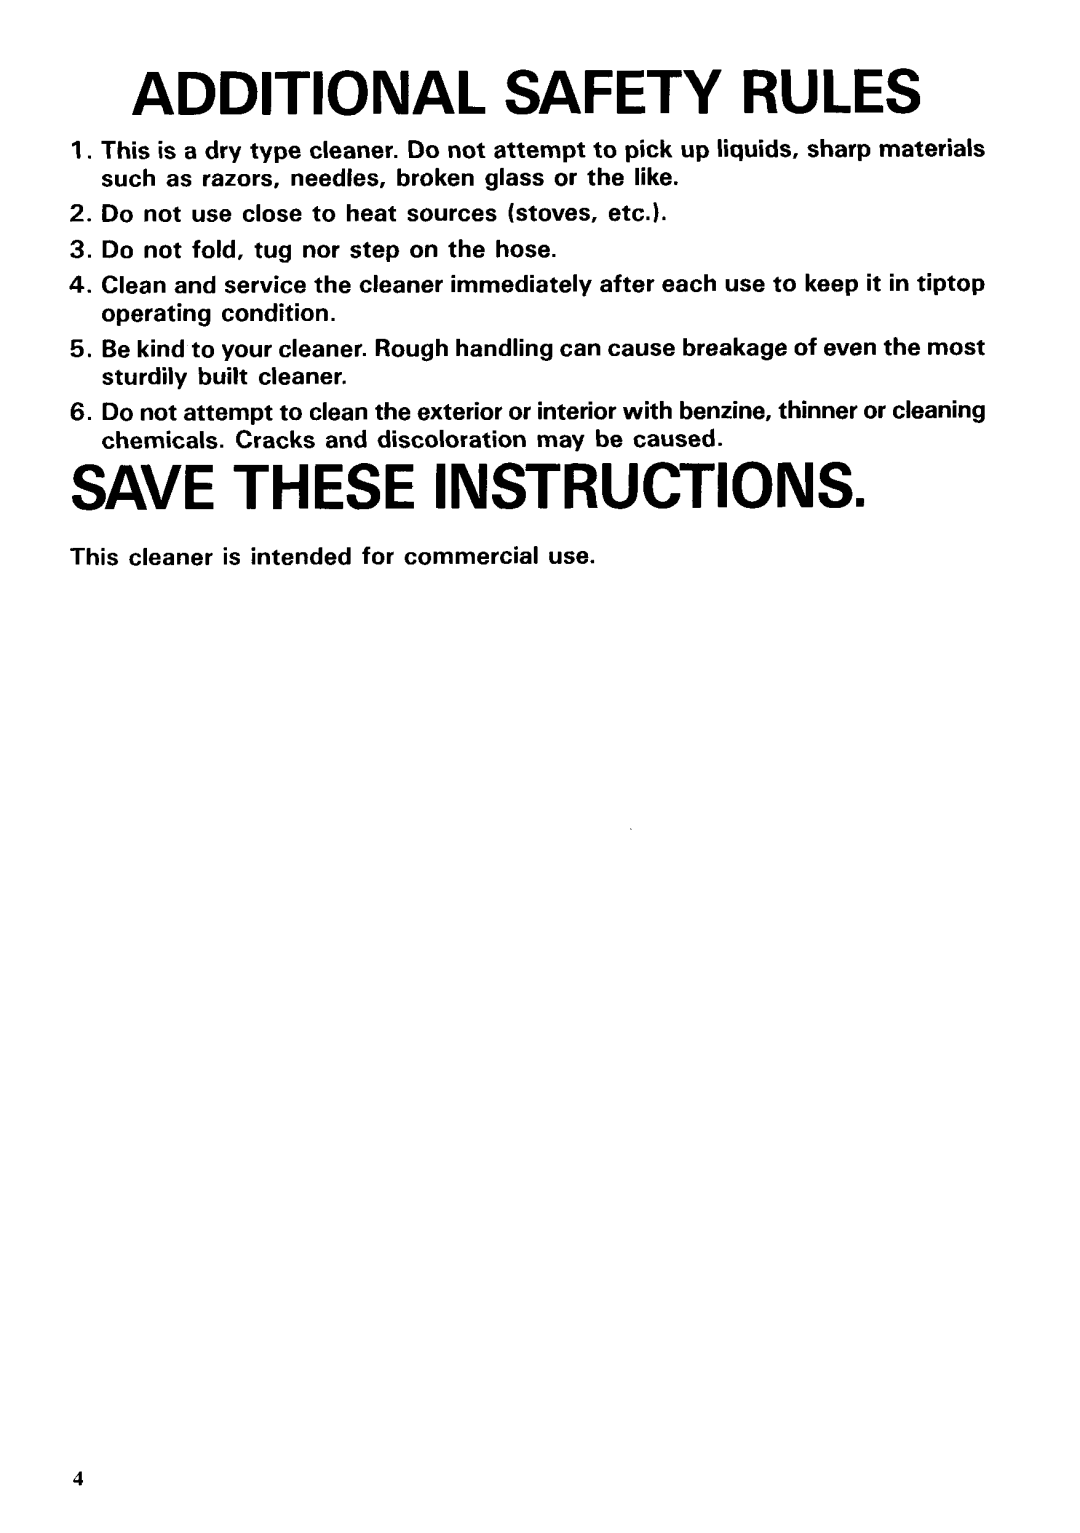 Makita 406 instruction manual Save These Instructions, Additional Safety Rules 